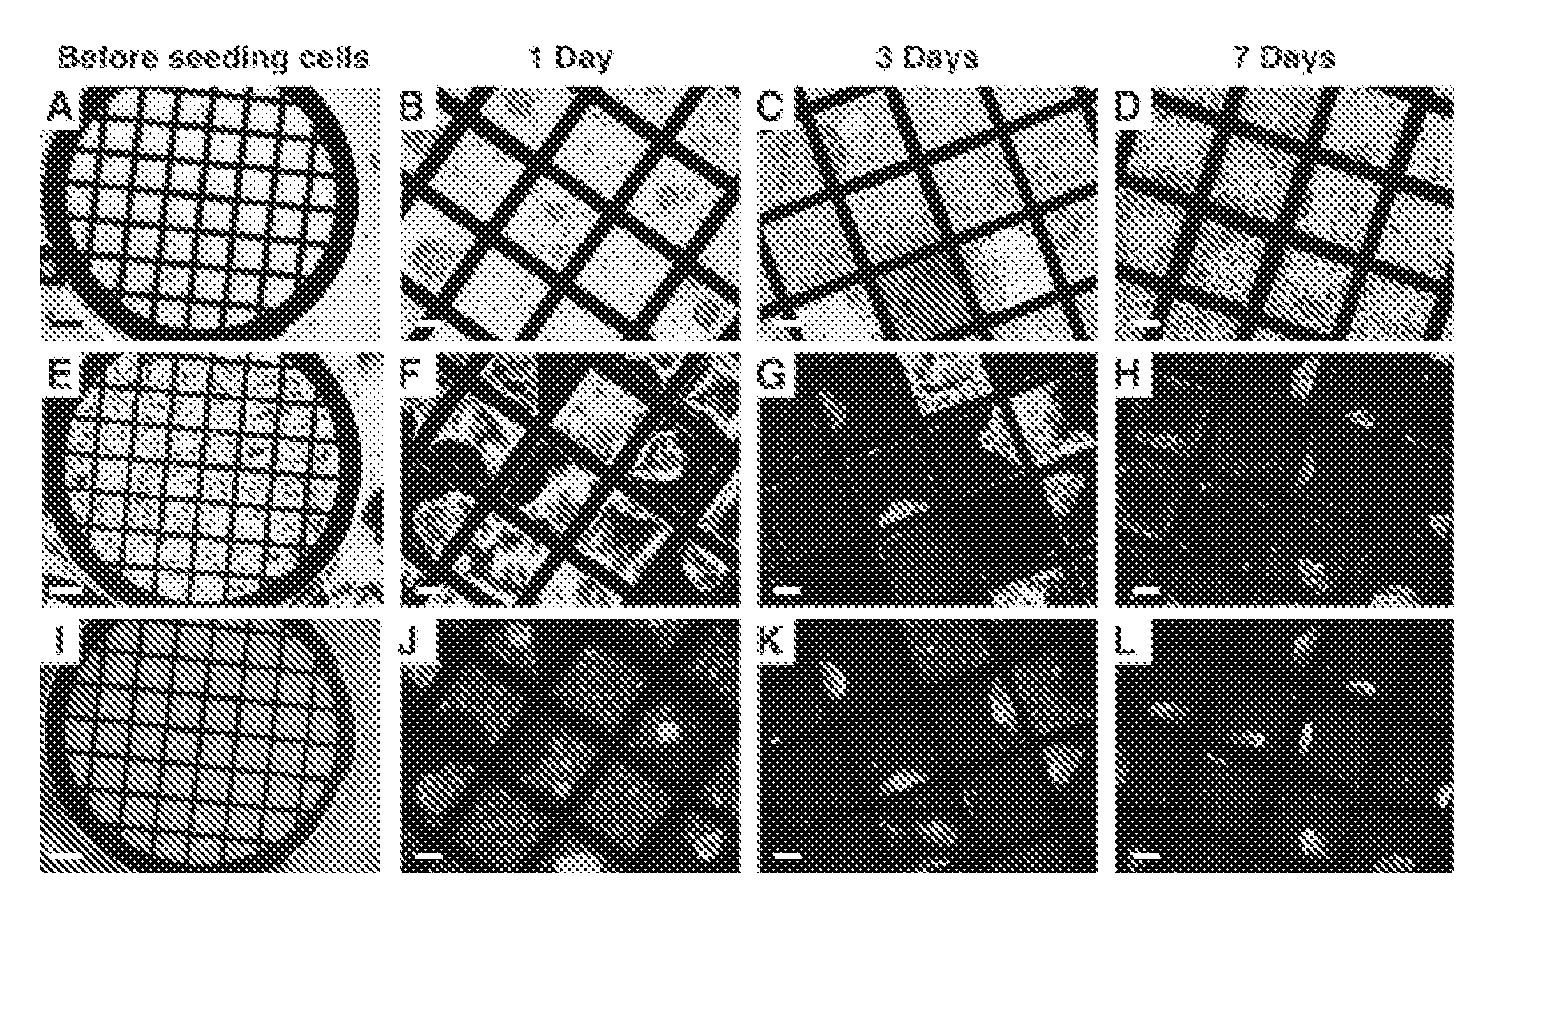 Liquid crystalline substrates for culturing cells